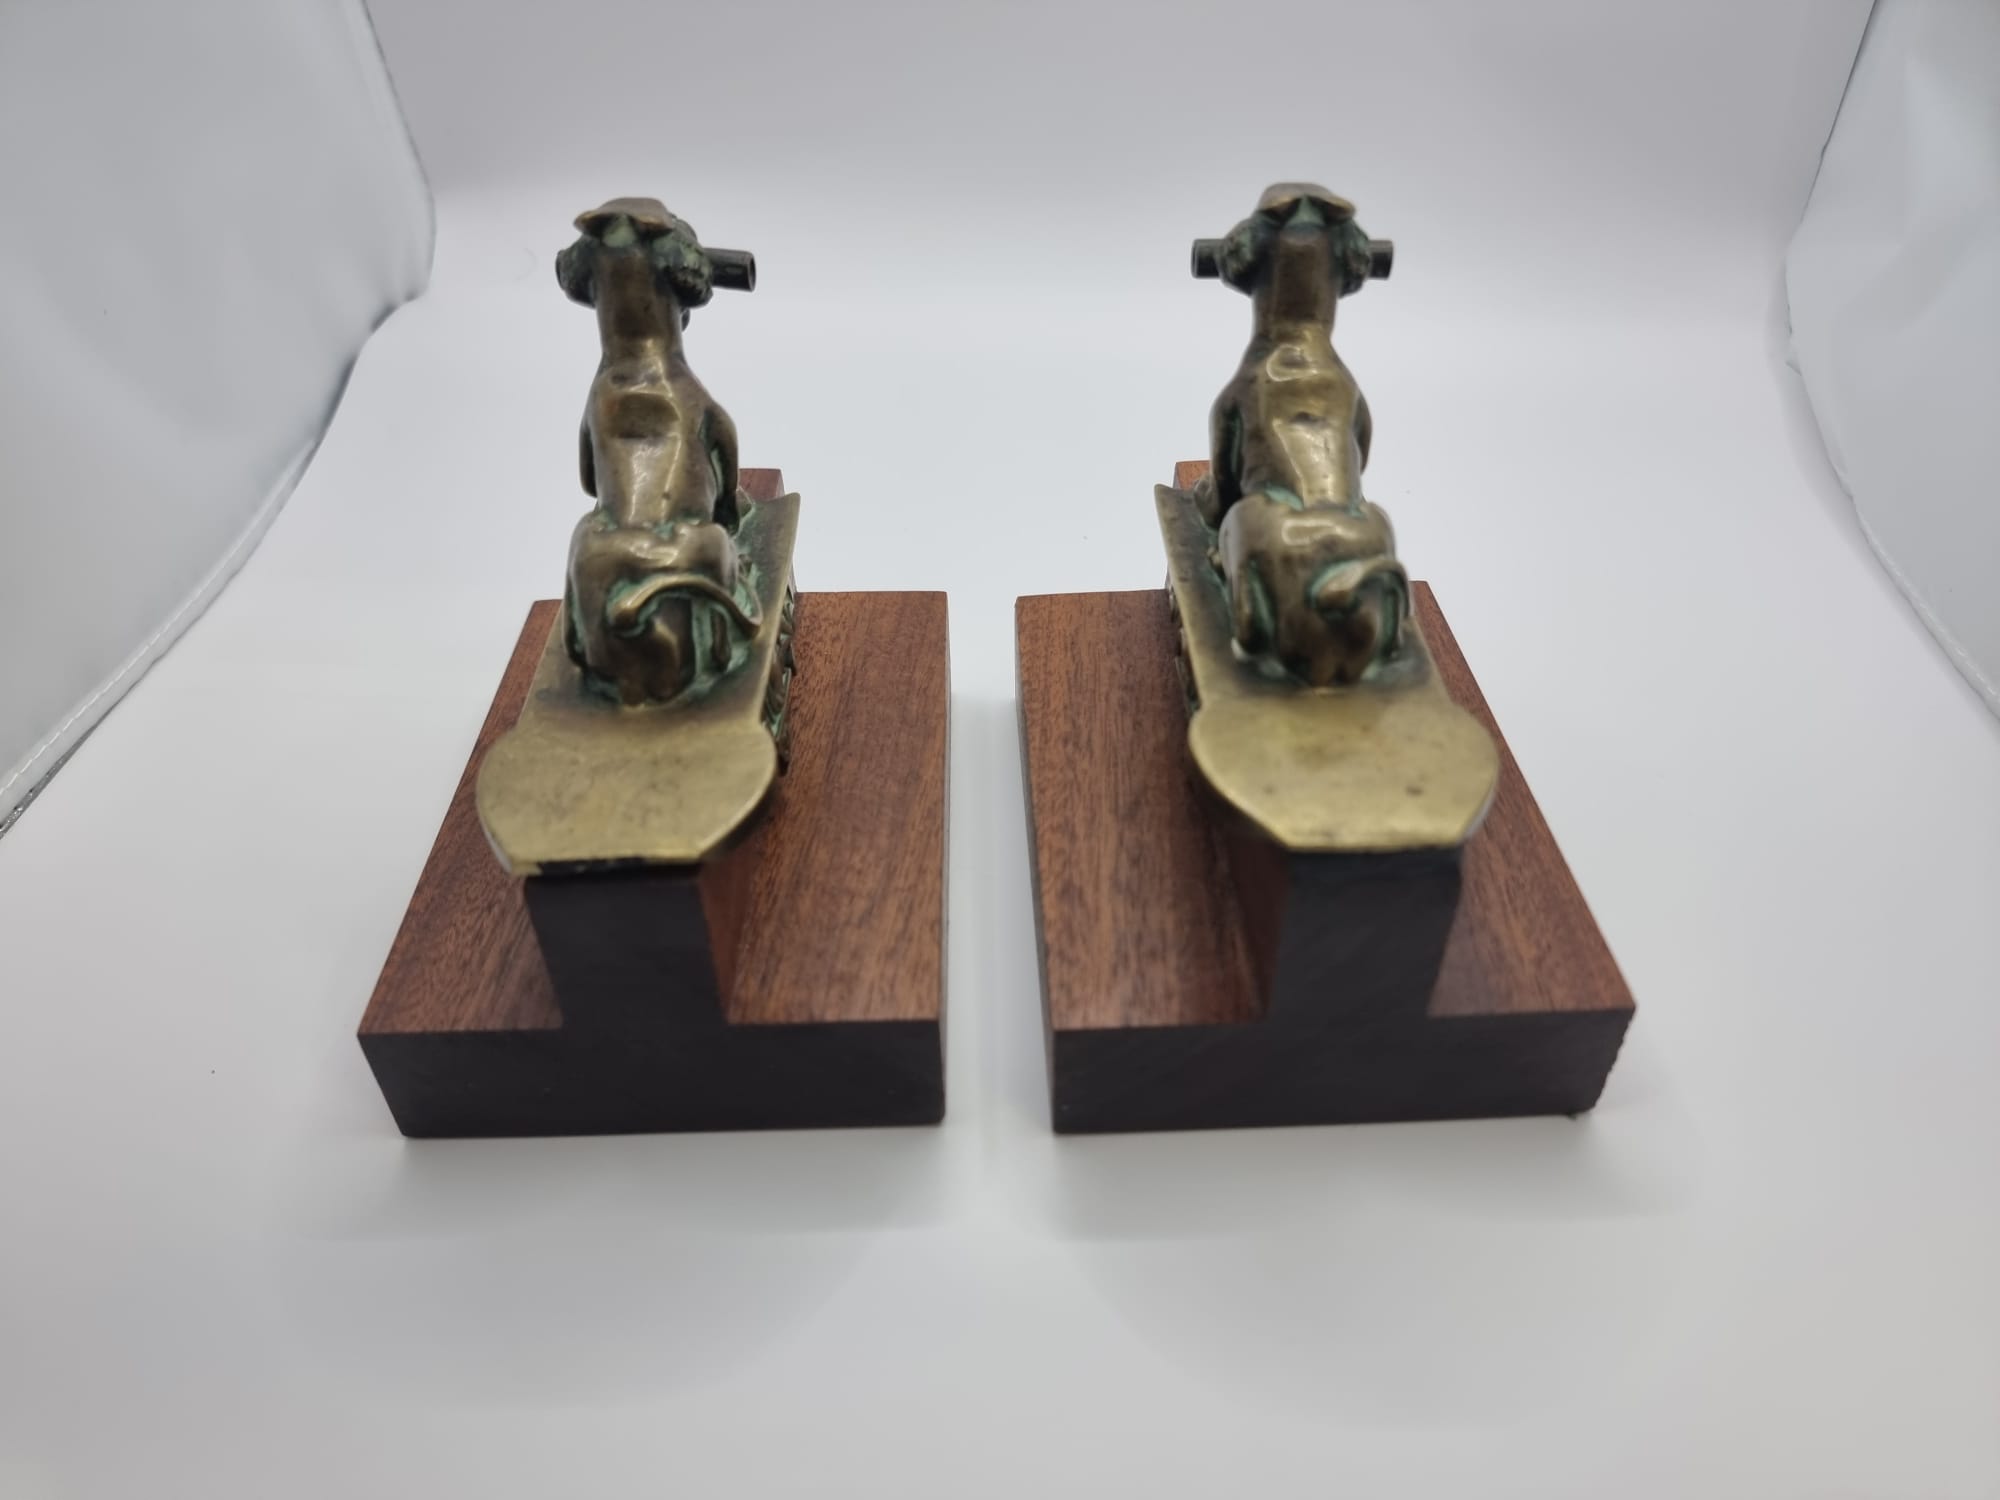 Pair Of 19th Century Decorative Bronze Lions later added to wooden plinth thus converted as Bookends - Image 8 of 10